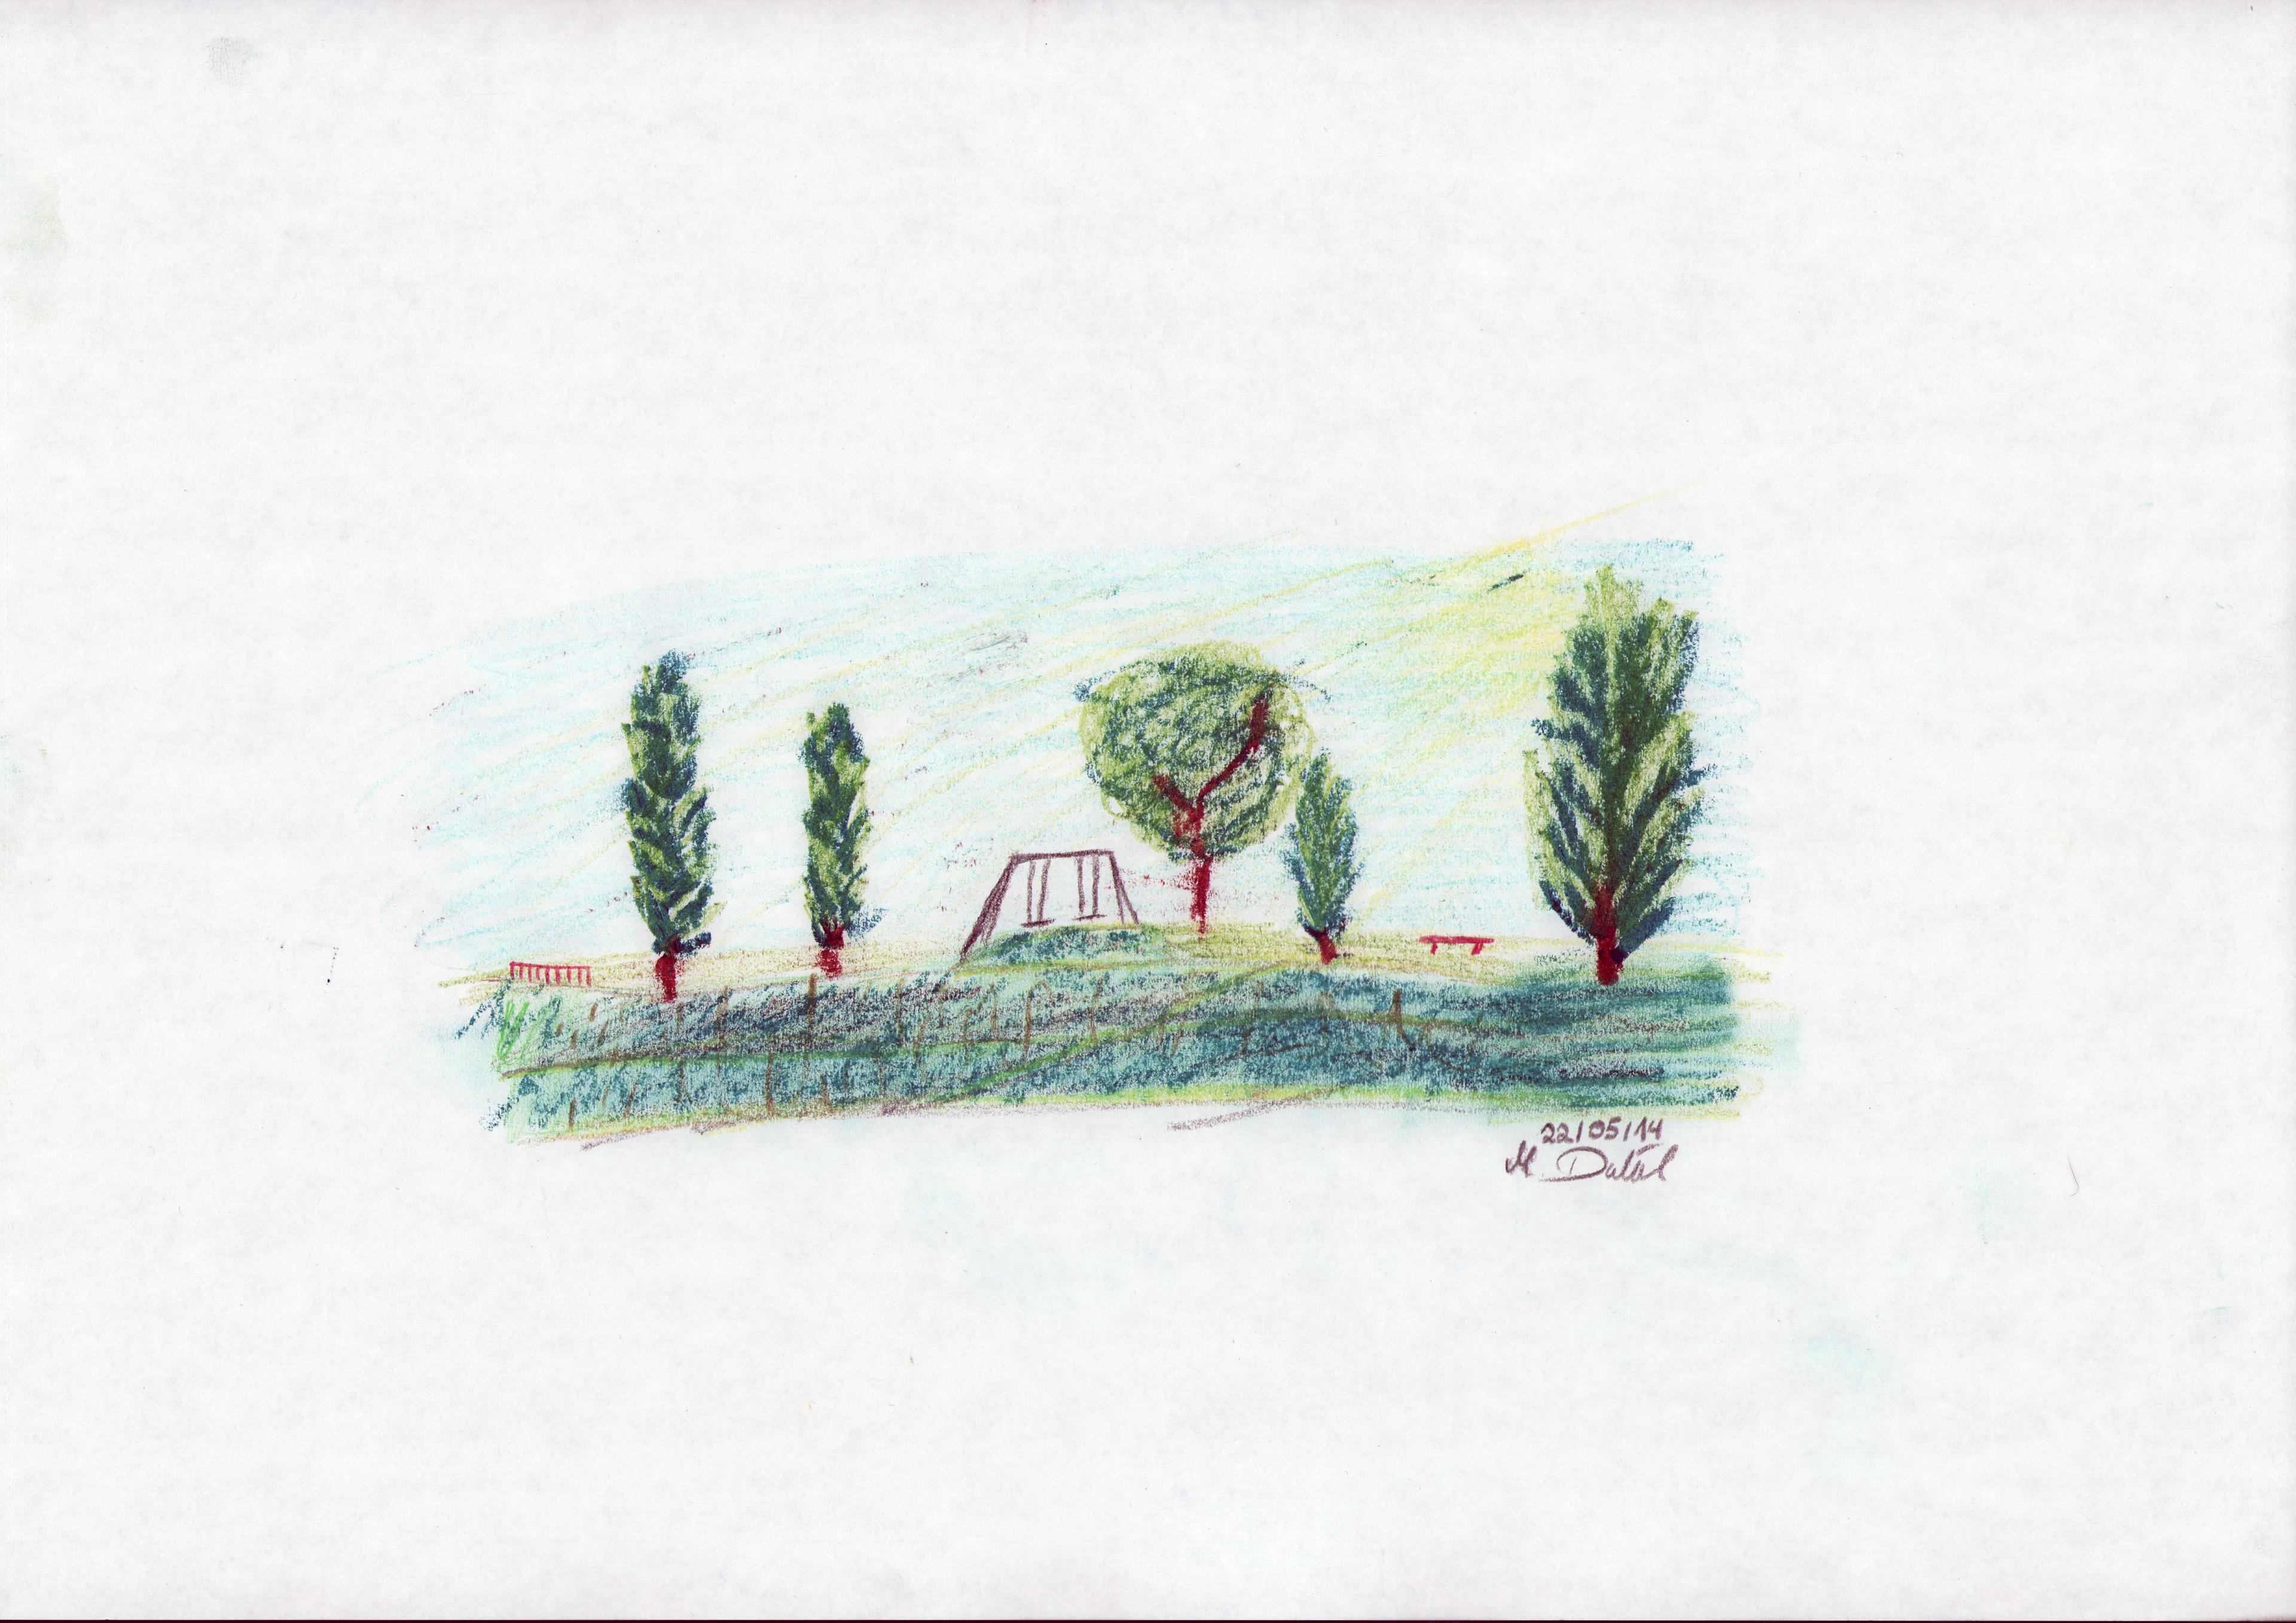 color pencil drawing of a park with trees, benches and kid's playground